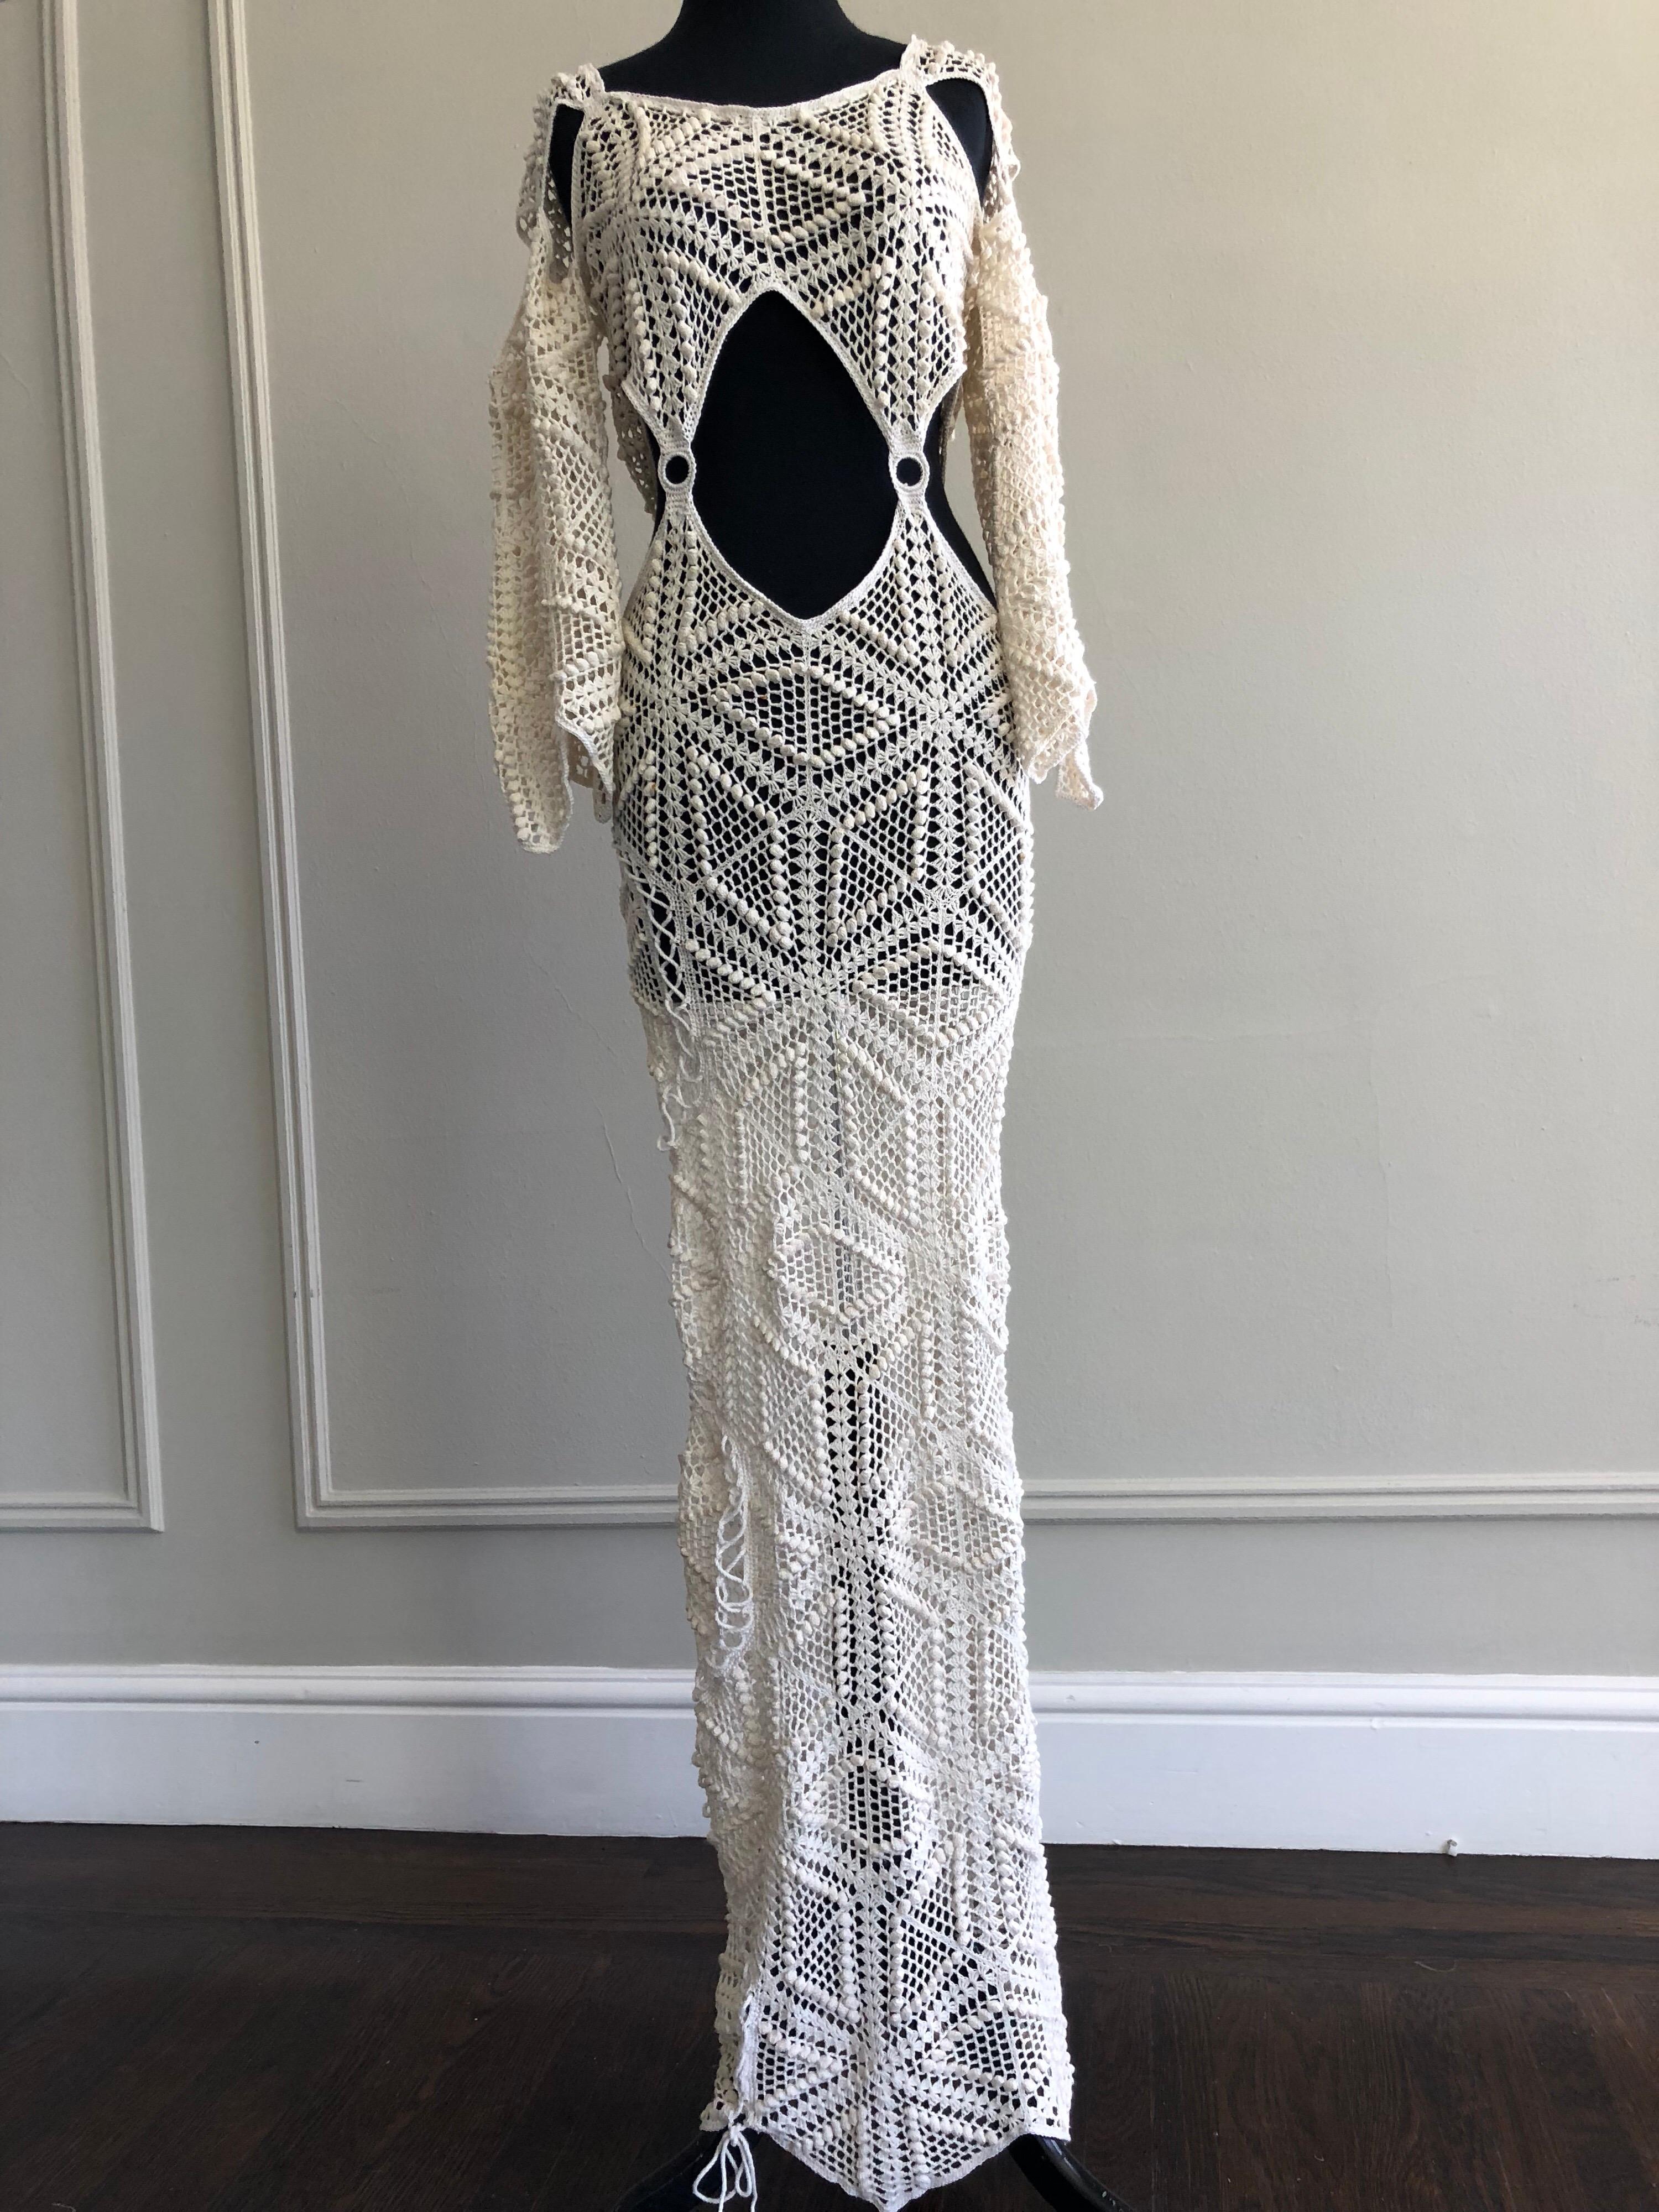 Women's 1970s Style Body Conscious Open Midriff Crochet Maxi Dress With Bell Sleeves